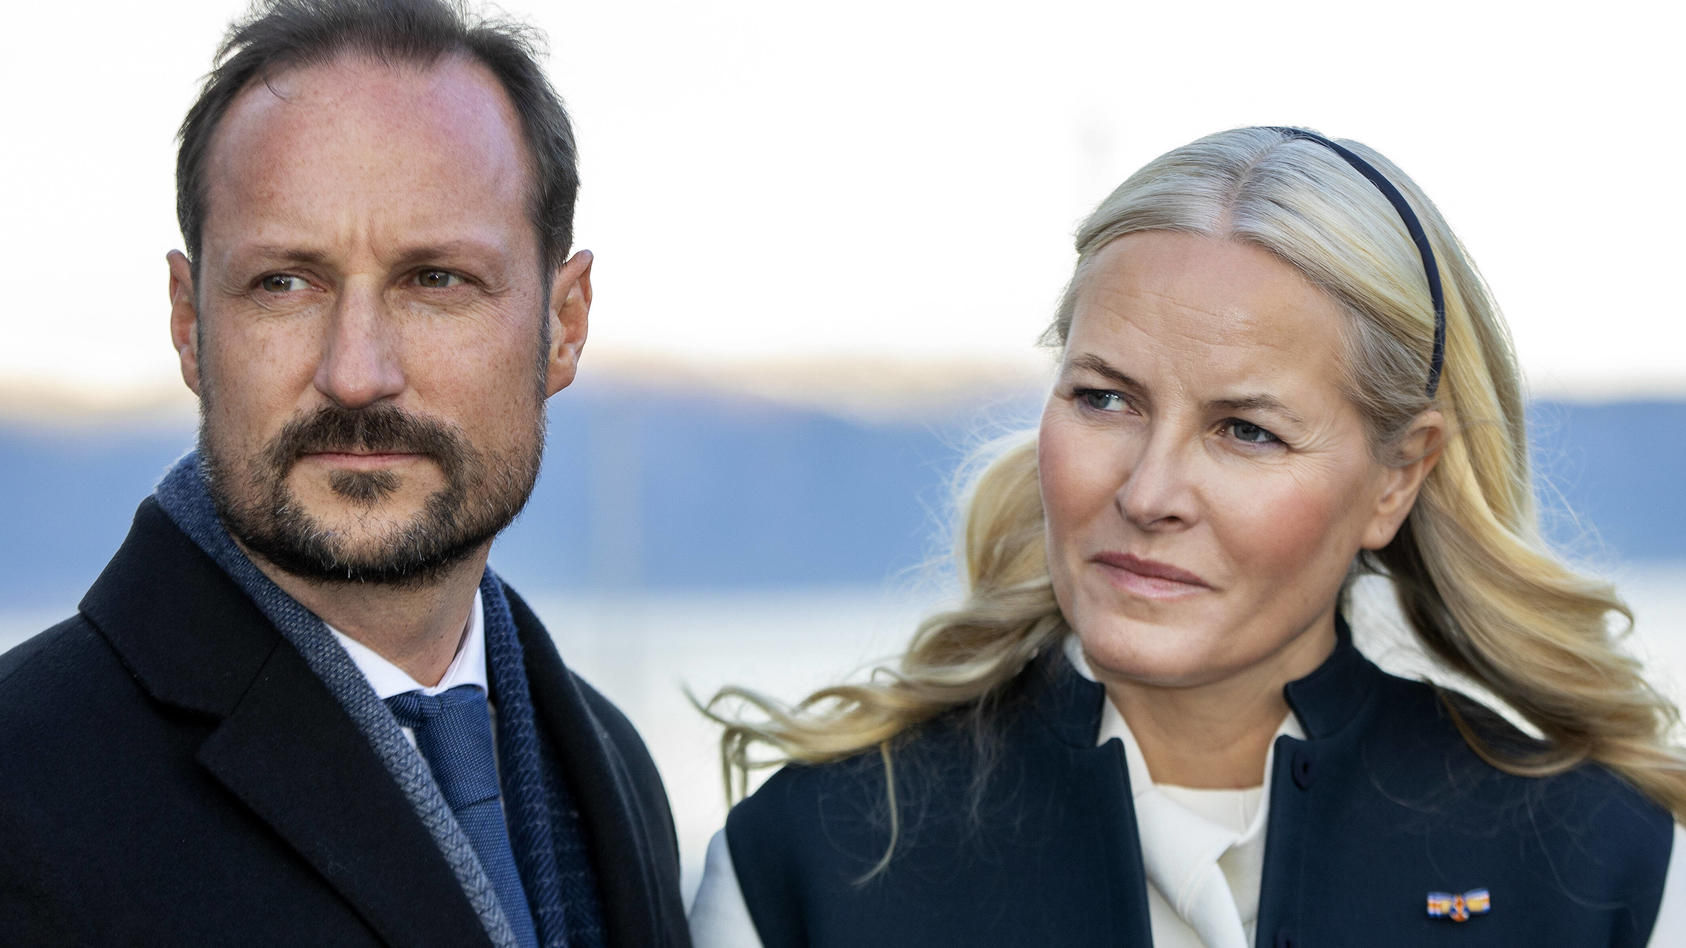  11-11-2021 Norway Prince Haakon and Princess Mette-Marit when arriving at the Trondheim Vaernes airport on the 3rd day of the 3 day statevisit to Norway.  PUBLICATIONxINxGERxSUIxAUTxONLY Copyright: xPPEx